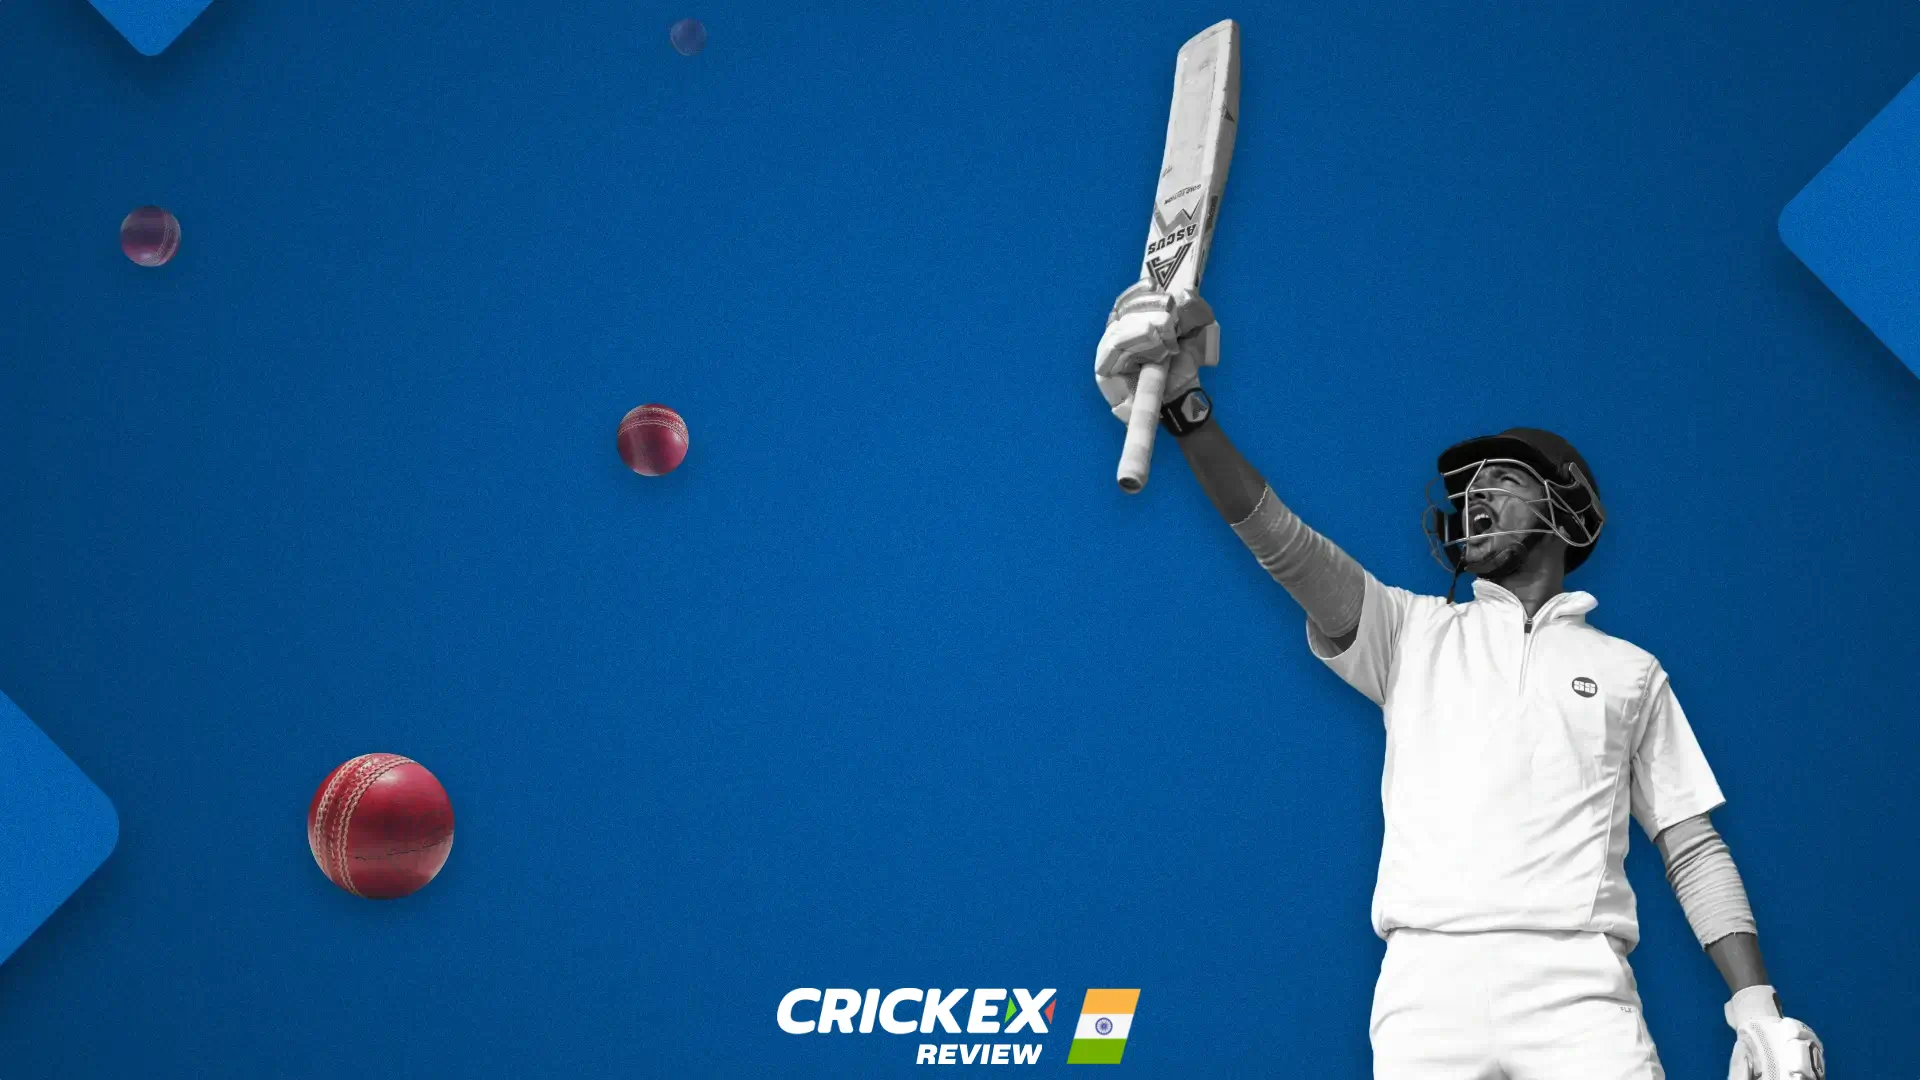 Bet on your favorite cricket teams with Crickex and win